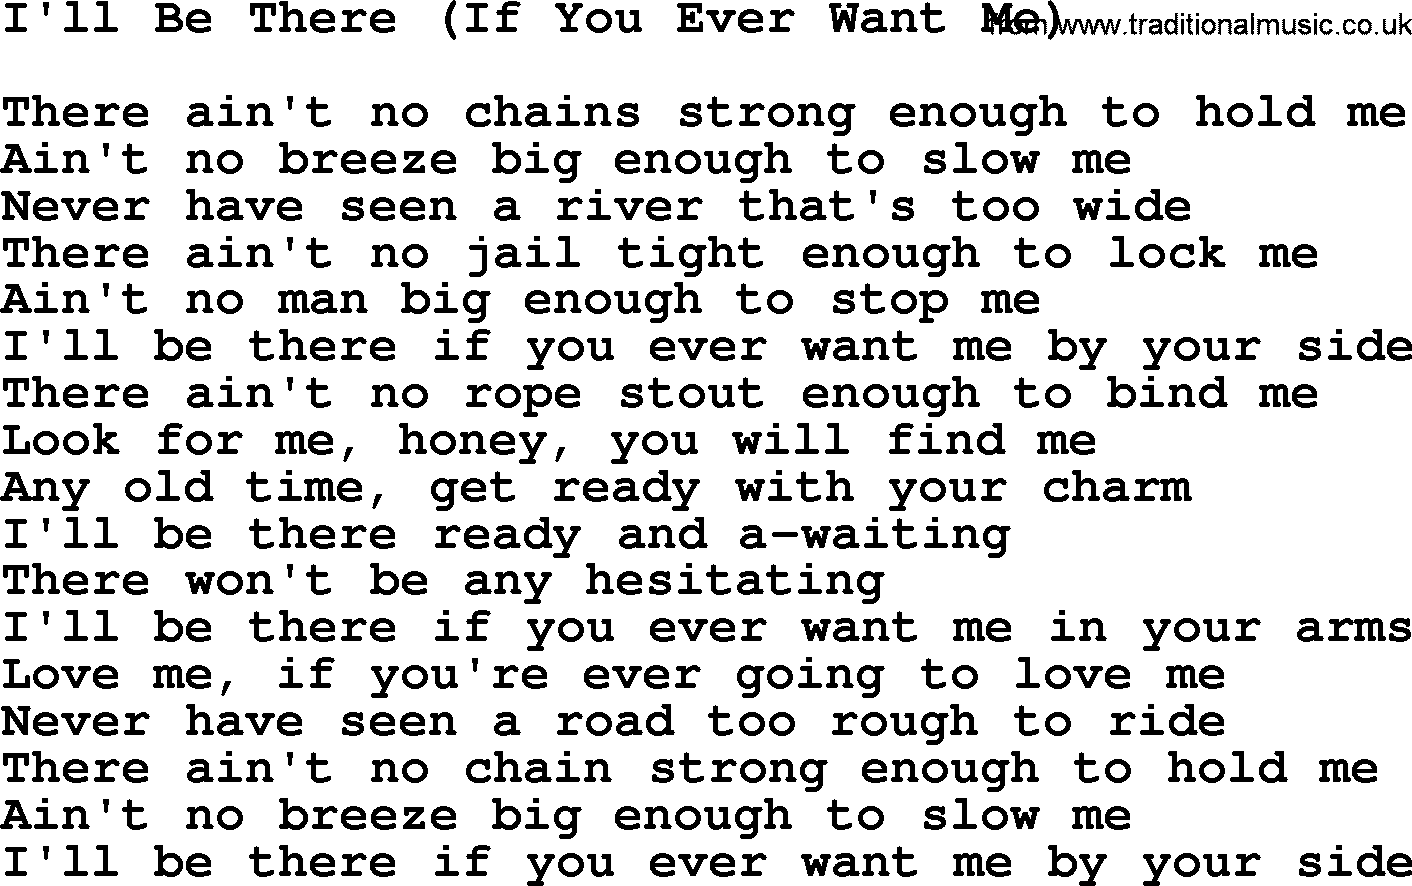 Willie Nelson song: I'll Be There (If You Ever Want Me) lyrics